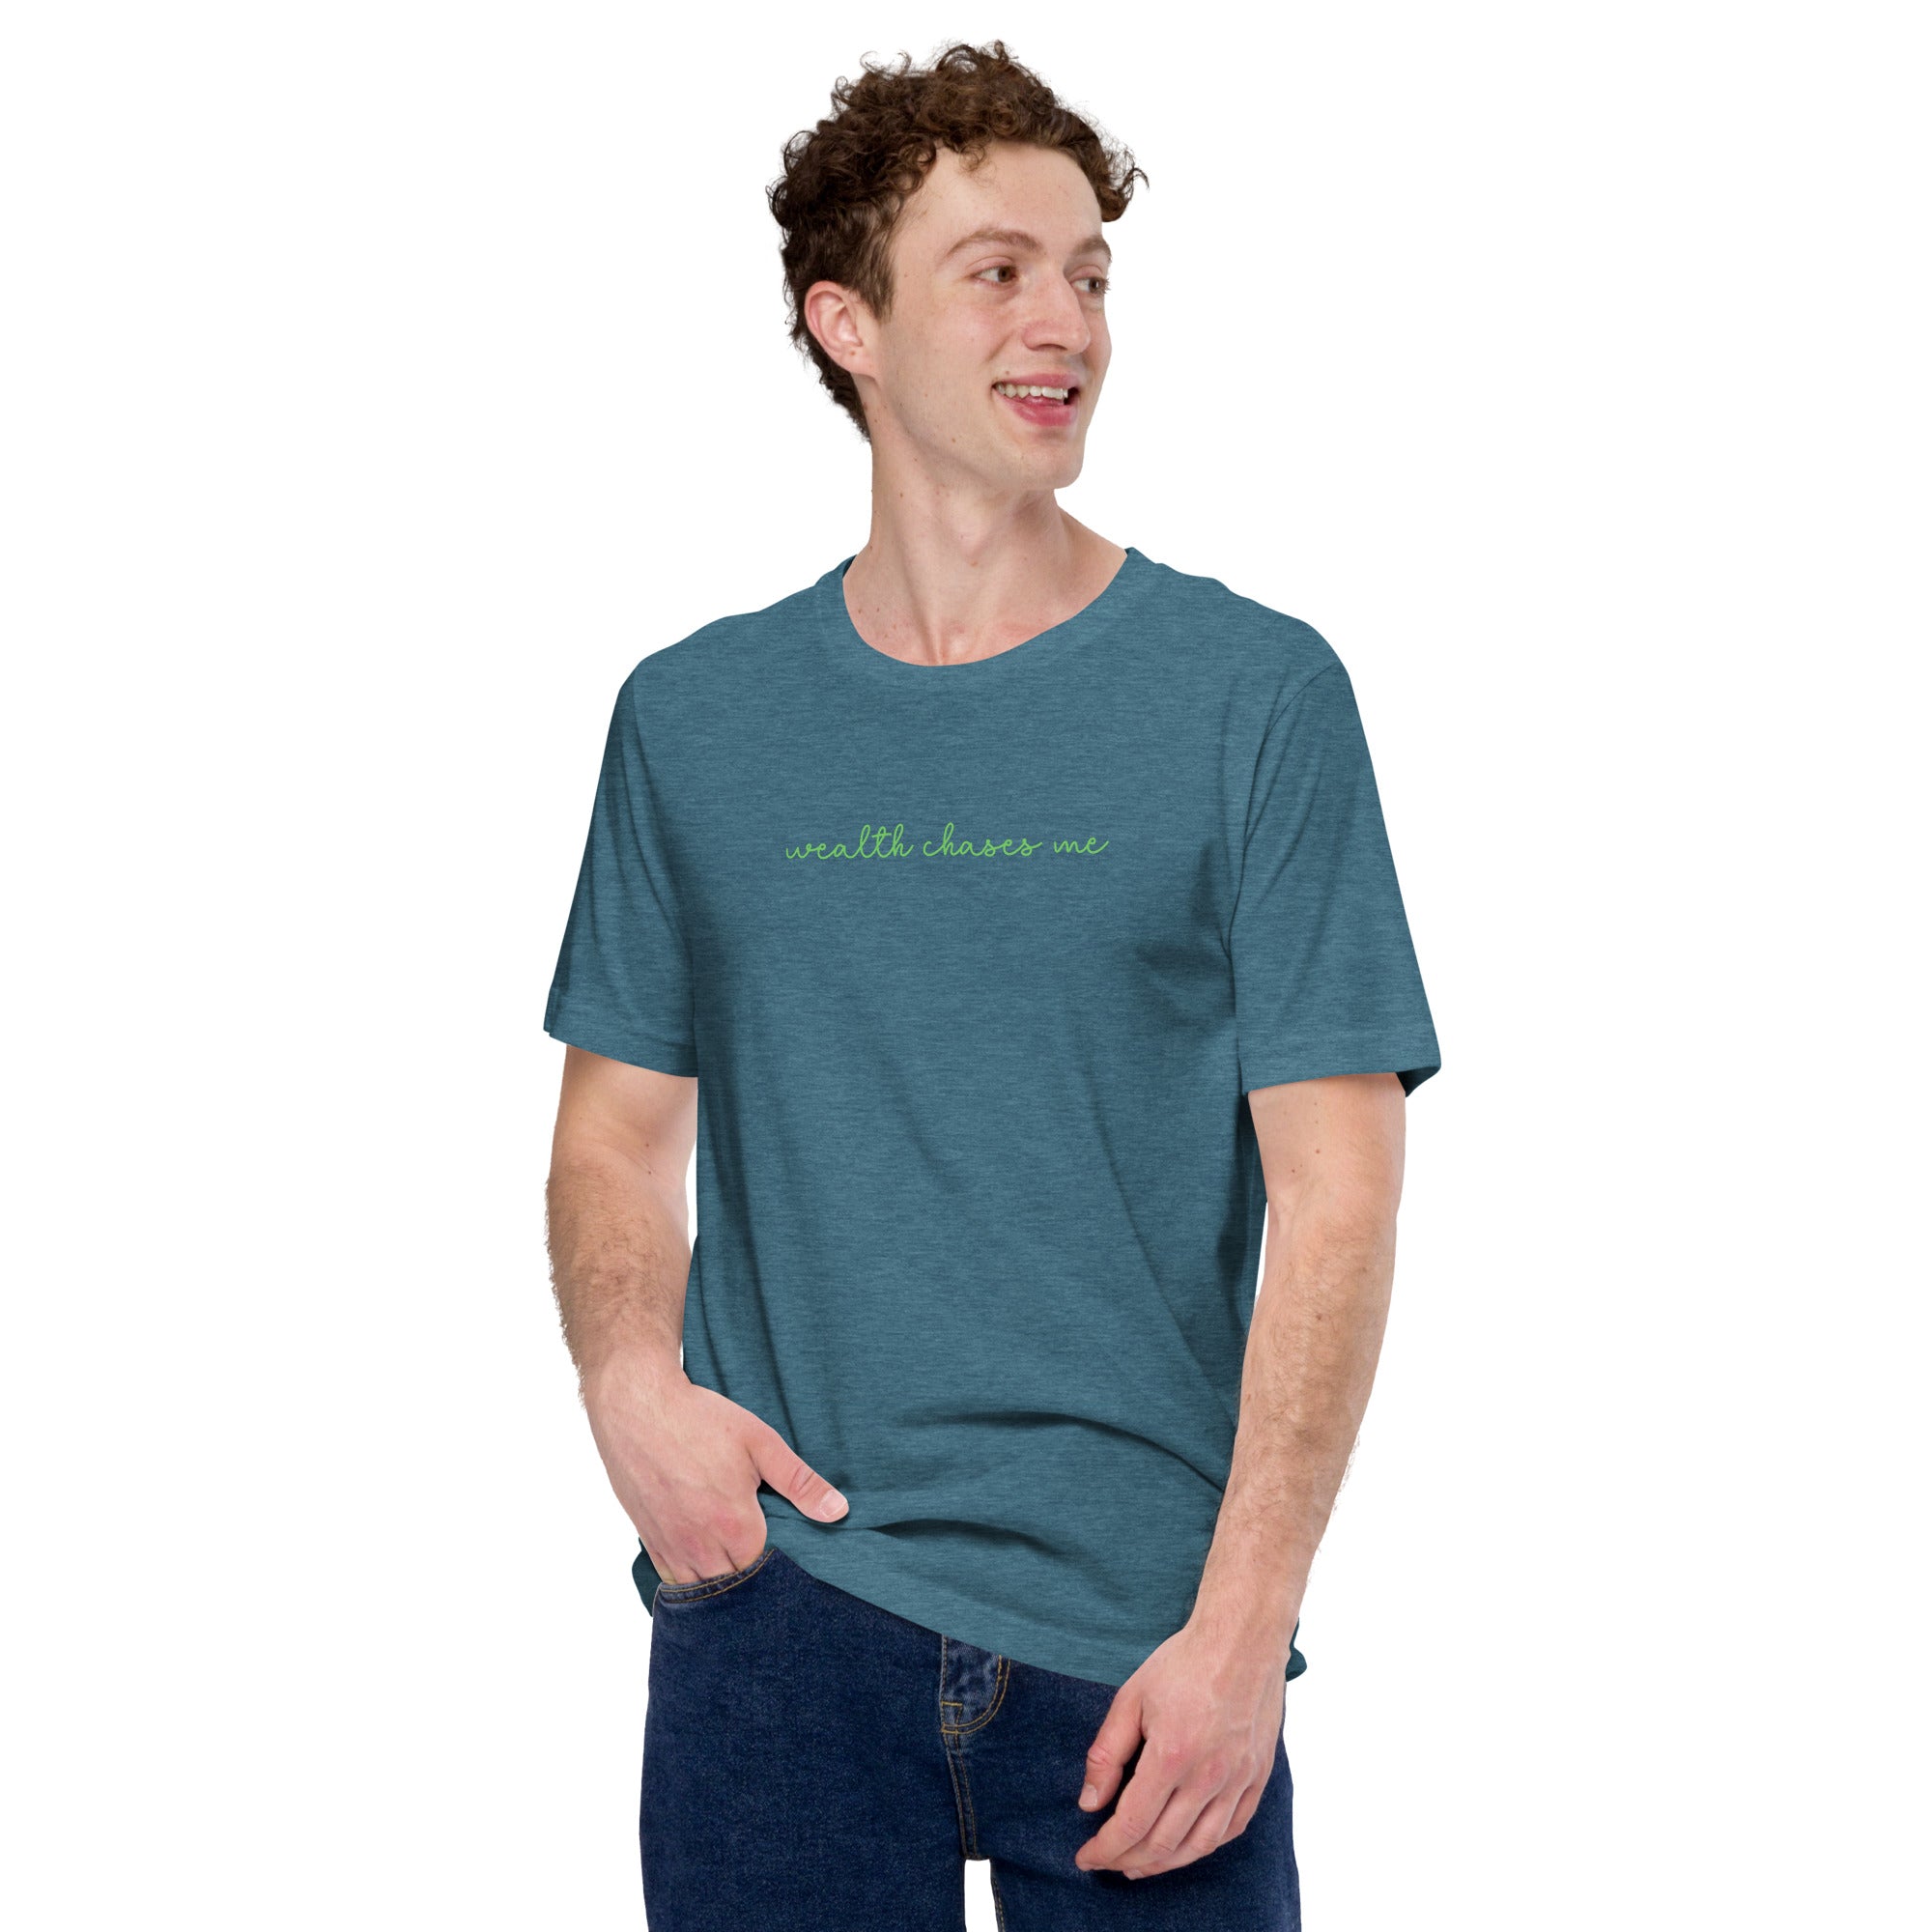 Wealth Chases Me, Premium Short-Sleeve Unisex T-Shirt | Positive Affirmation Tee